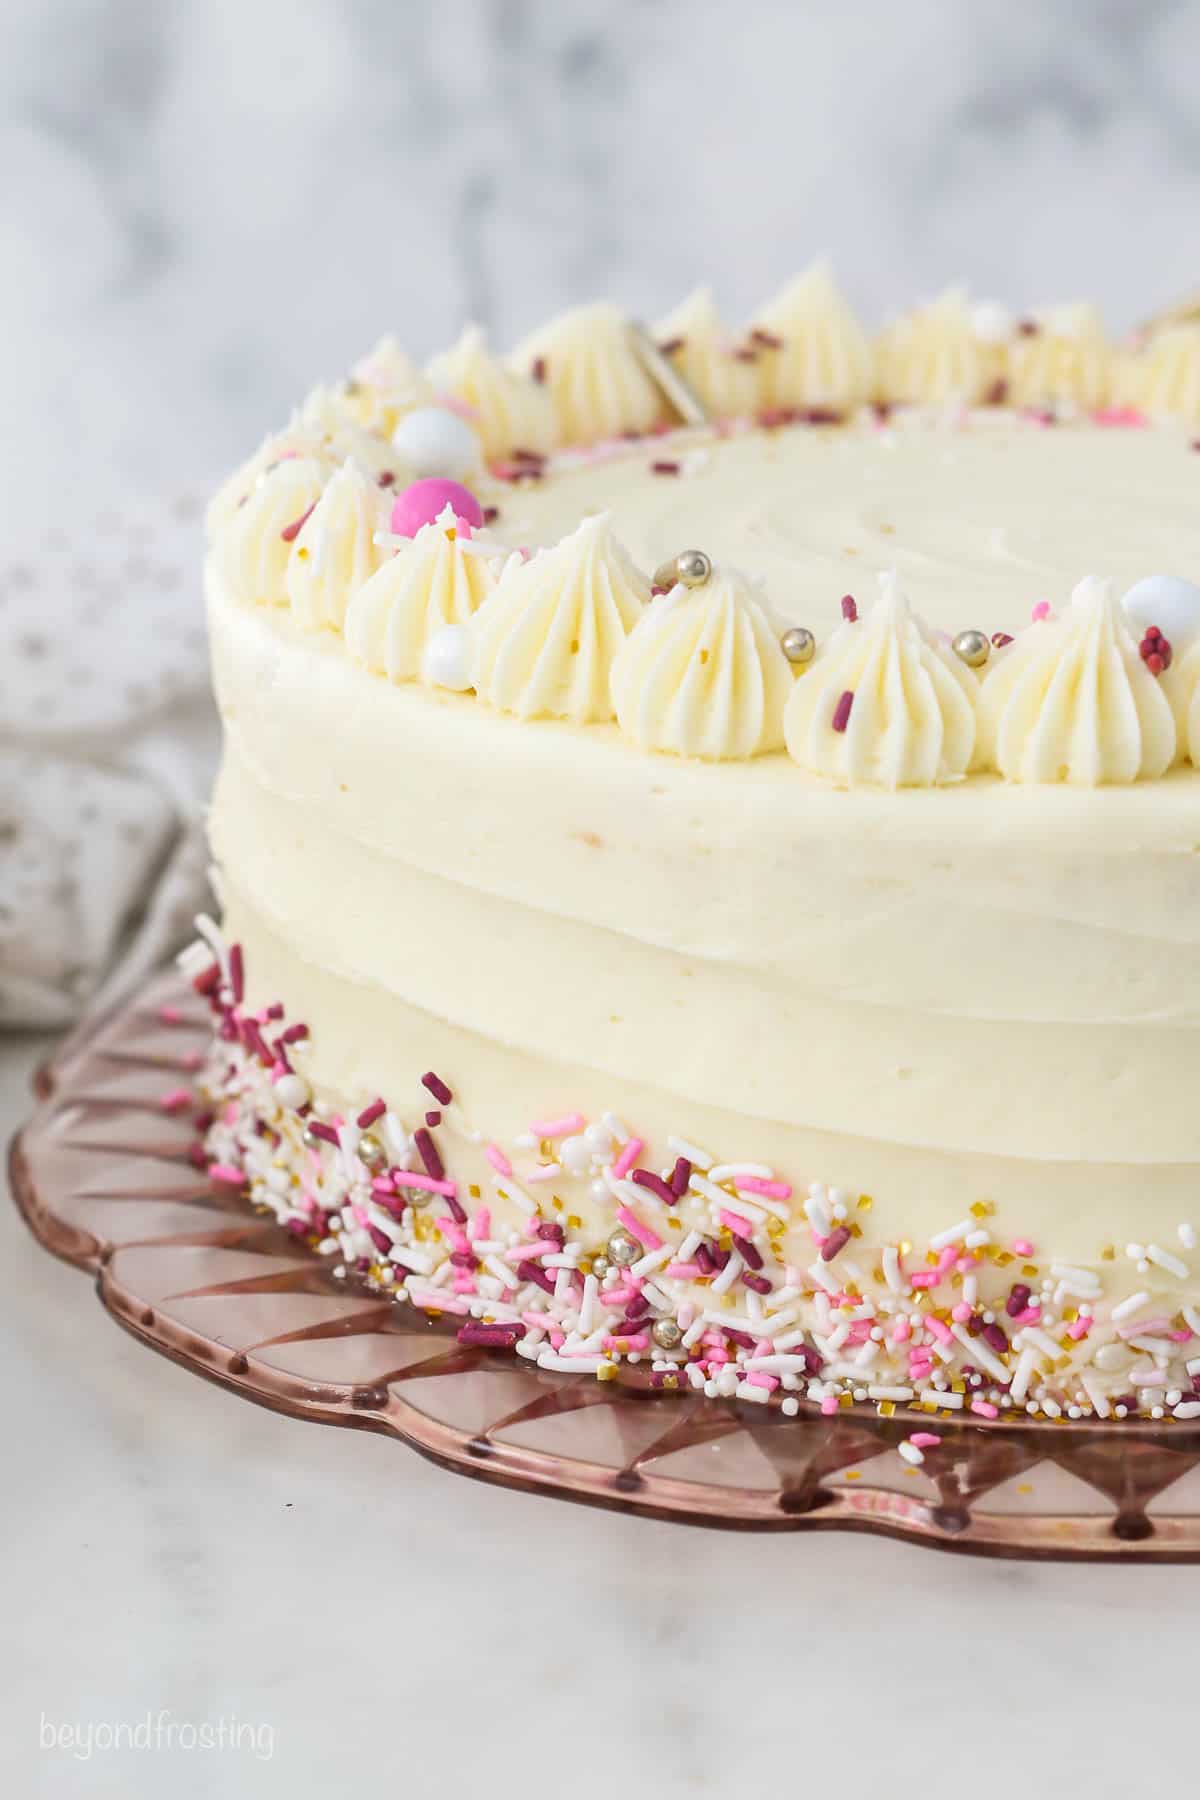 A finished frosted layer cake decorated with a crown of frosting swirls and rainbow sprinkles.